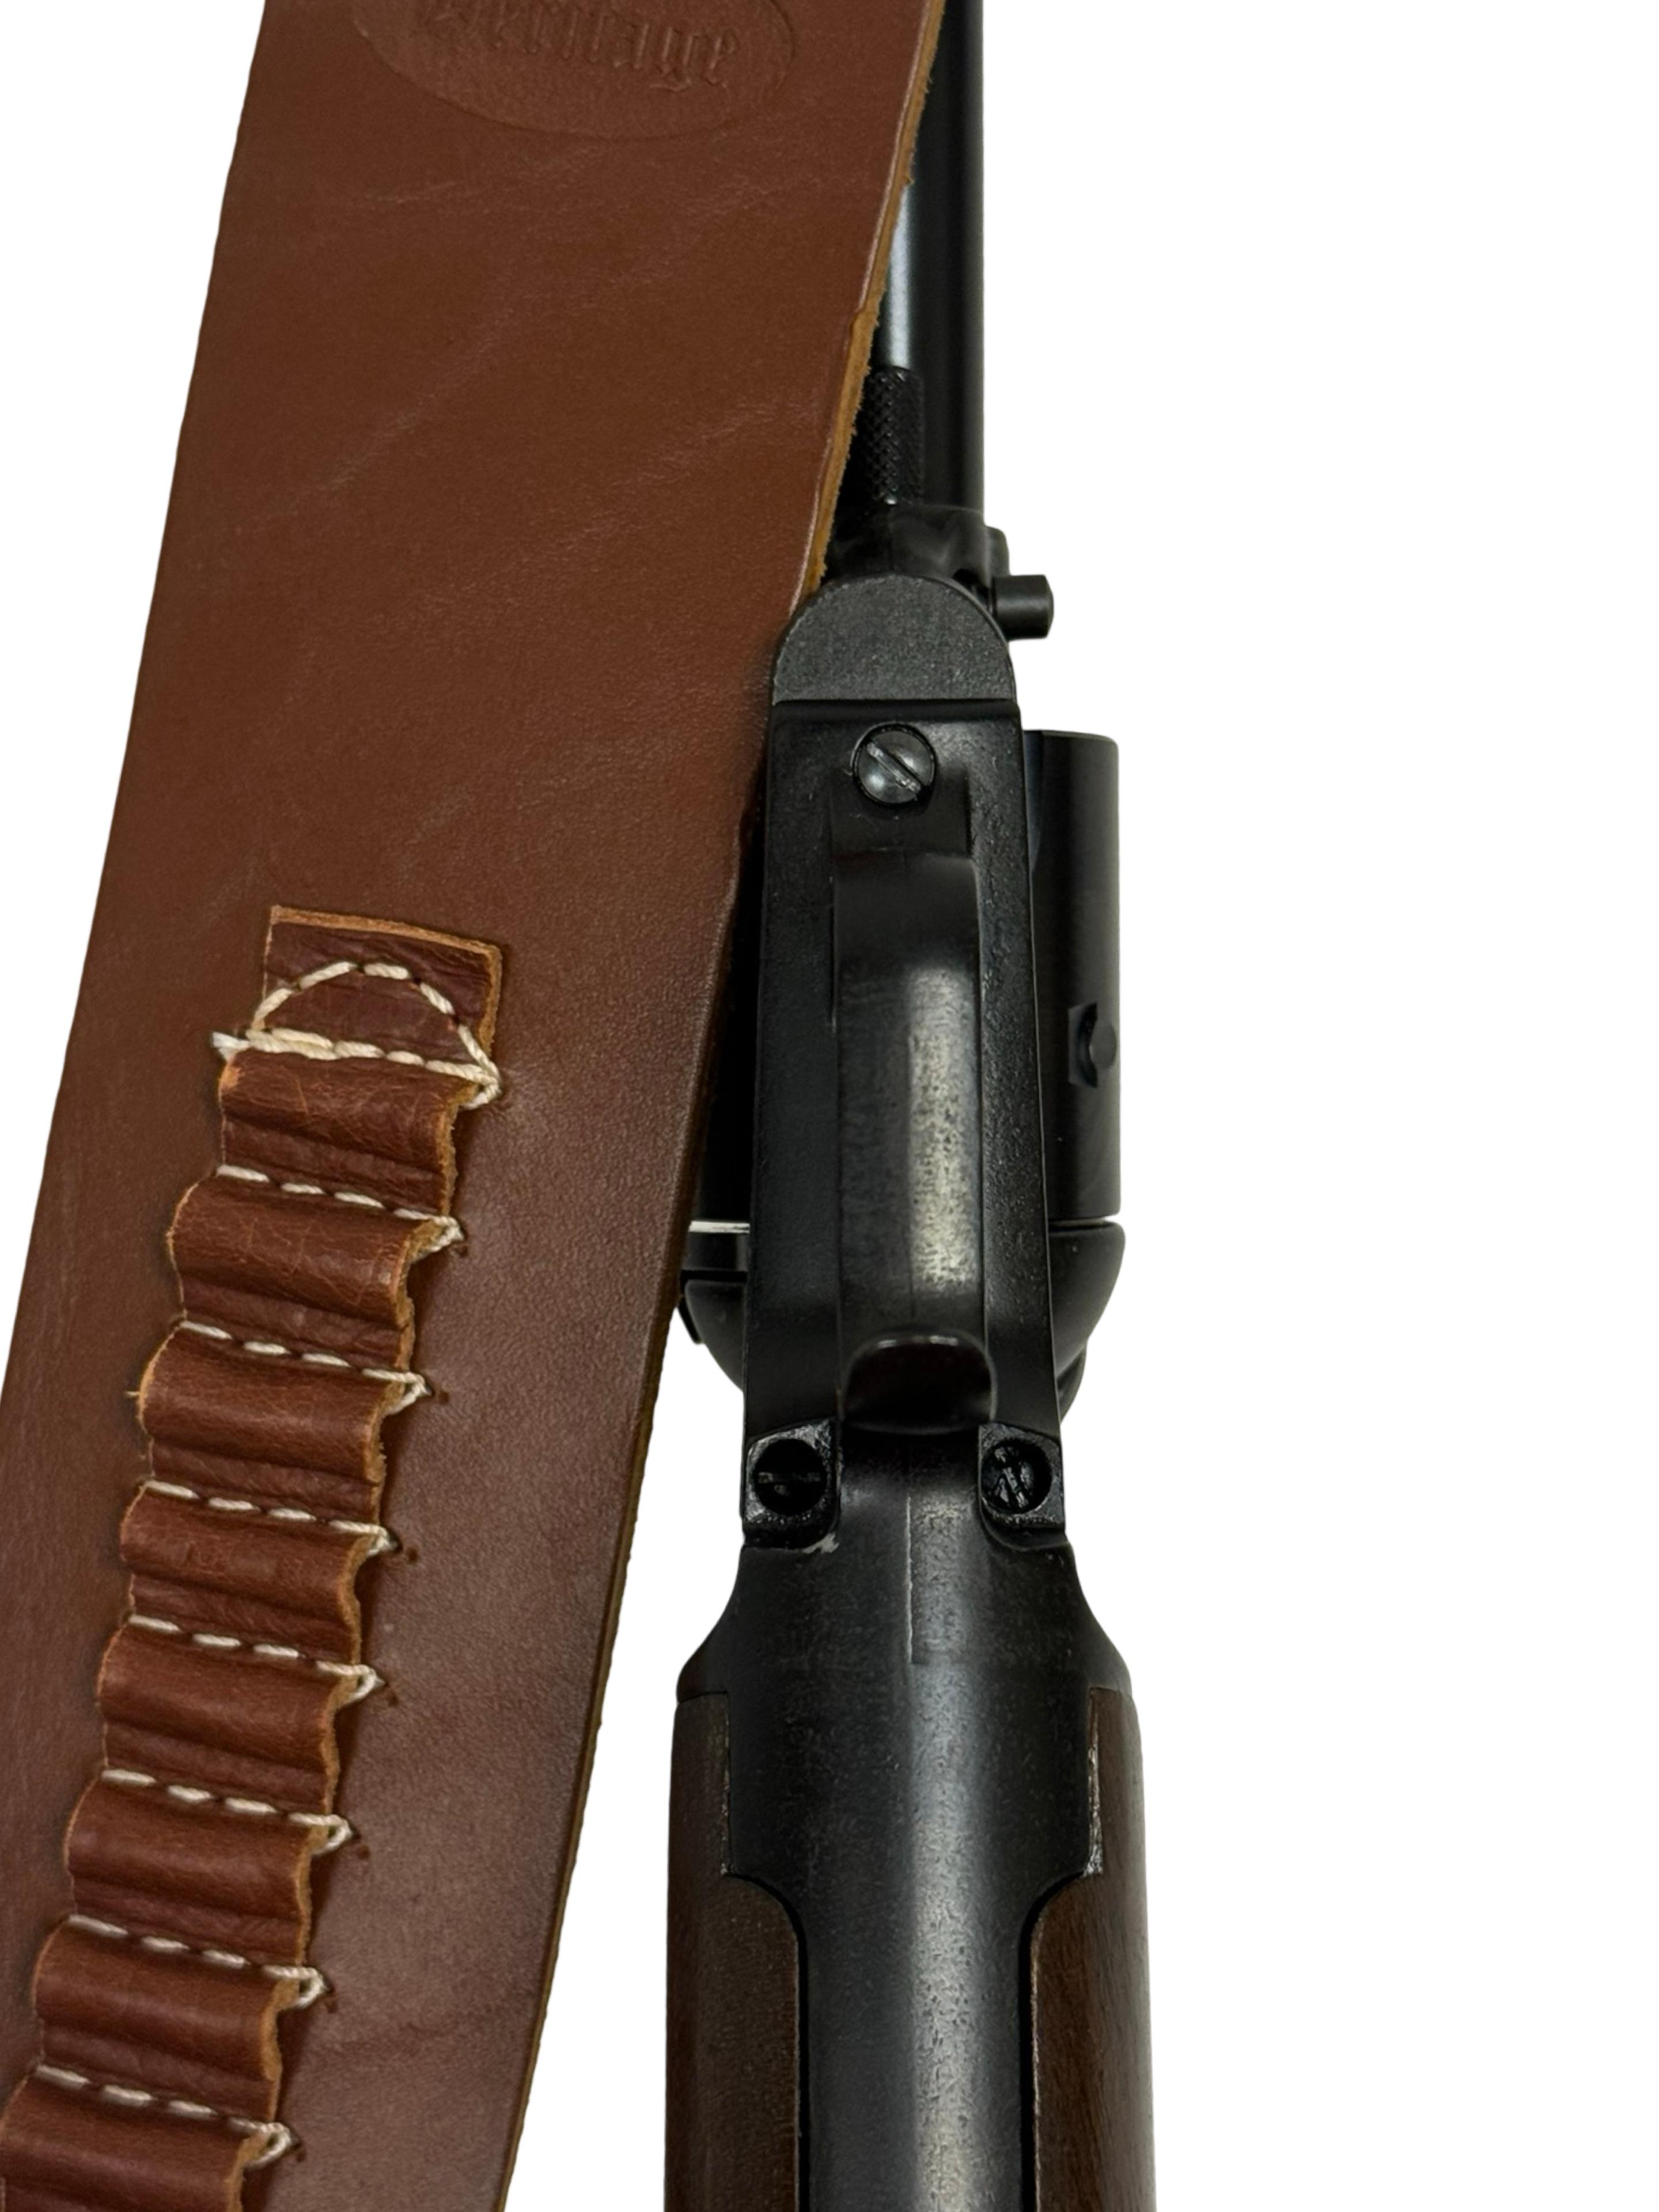 New Heritage Mfg. Rough Rider .22 LR Revolver Rifle with Leather Cartridge Sling